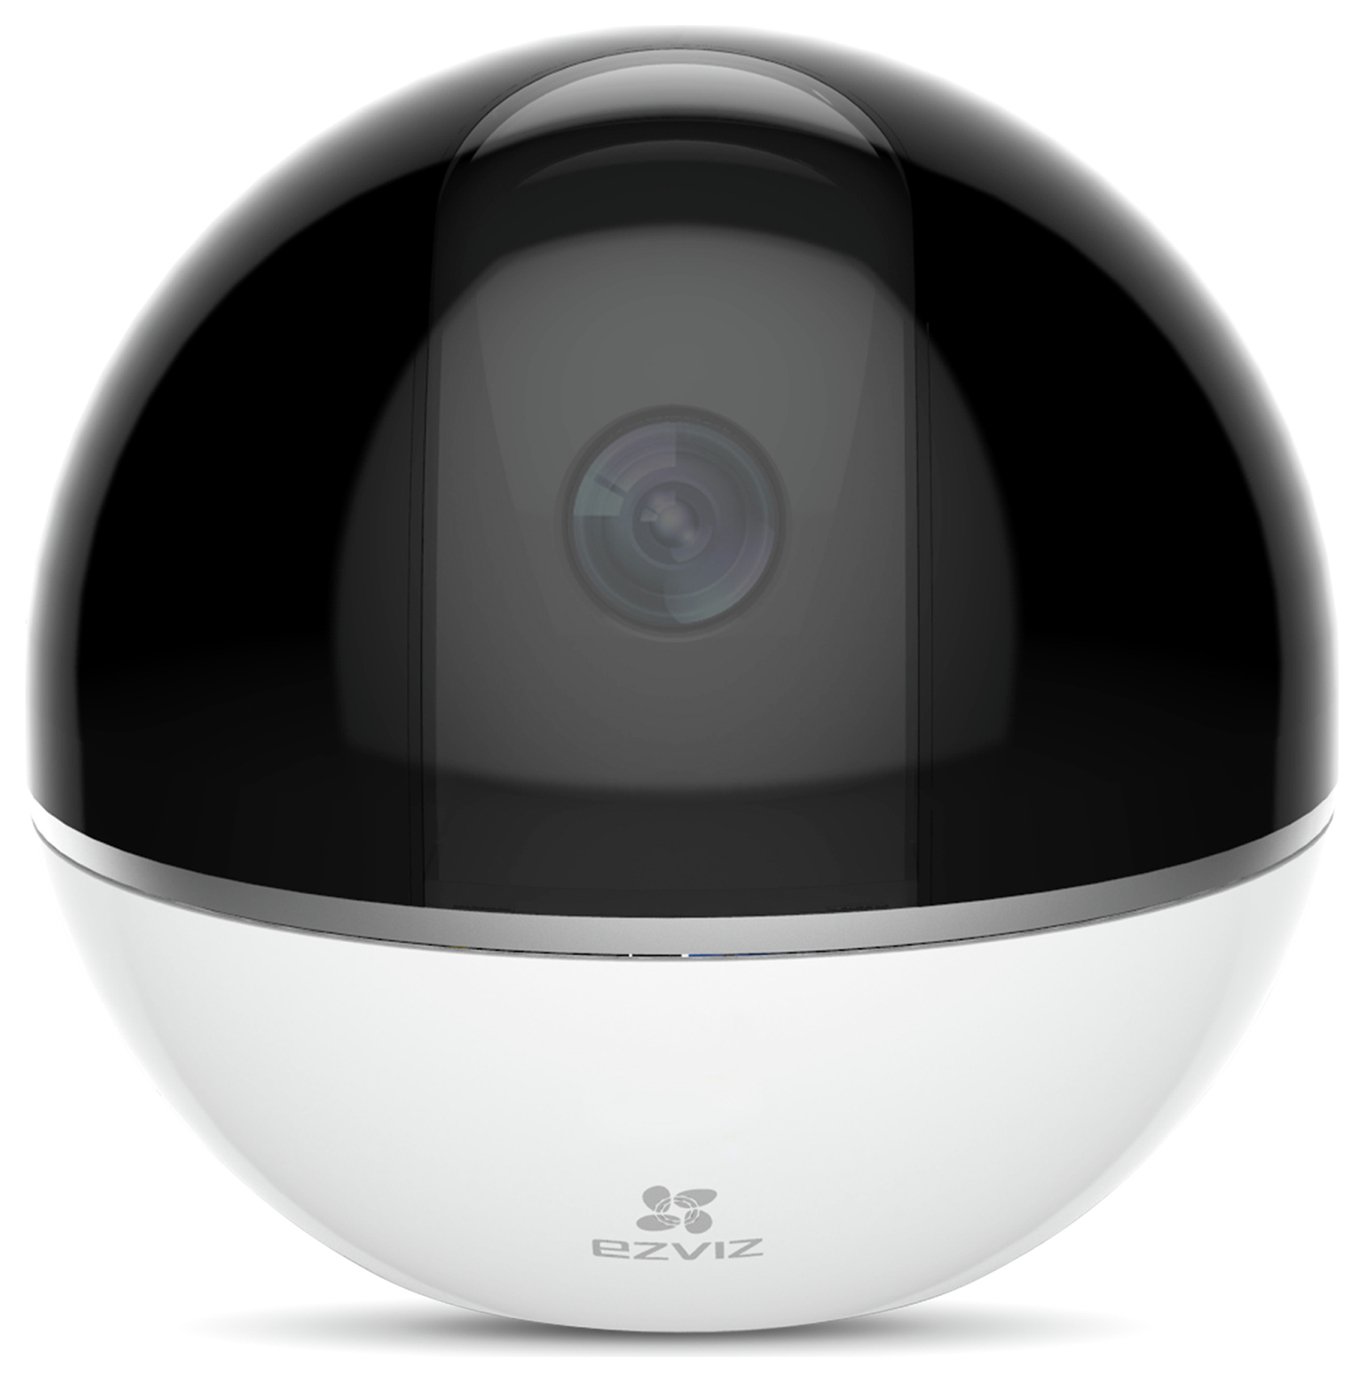 EZVIZ Full HD Wi-Fi Indoor Camera with Motion Tracking review